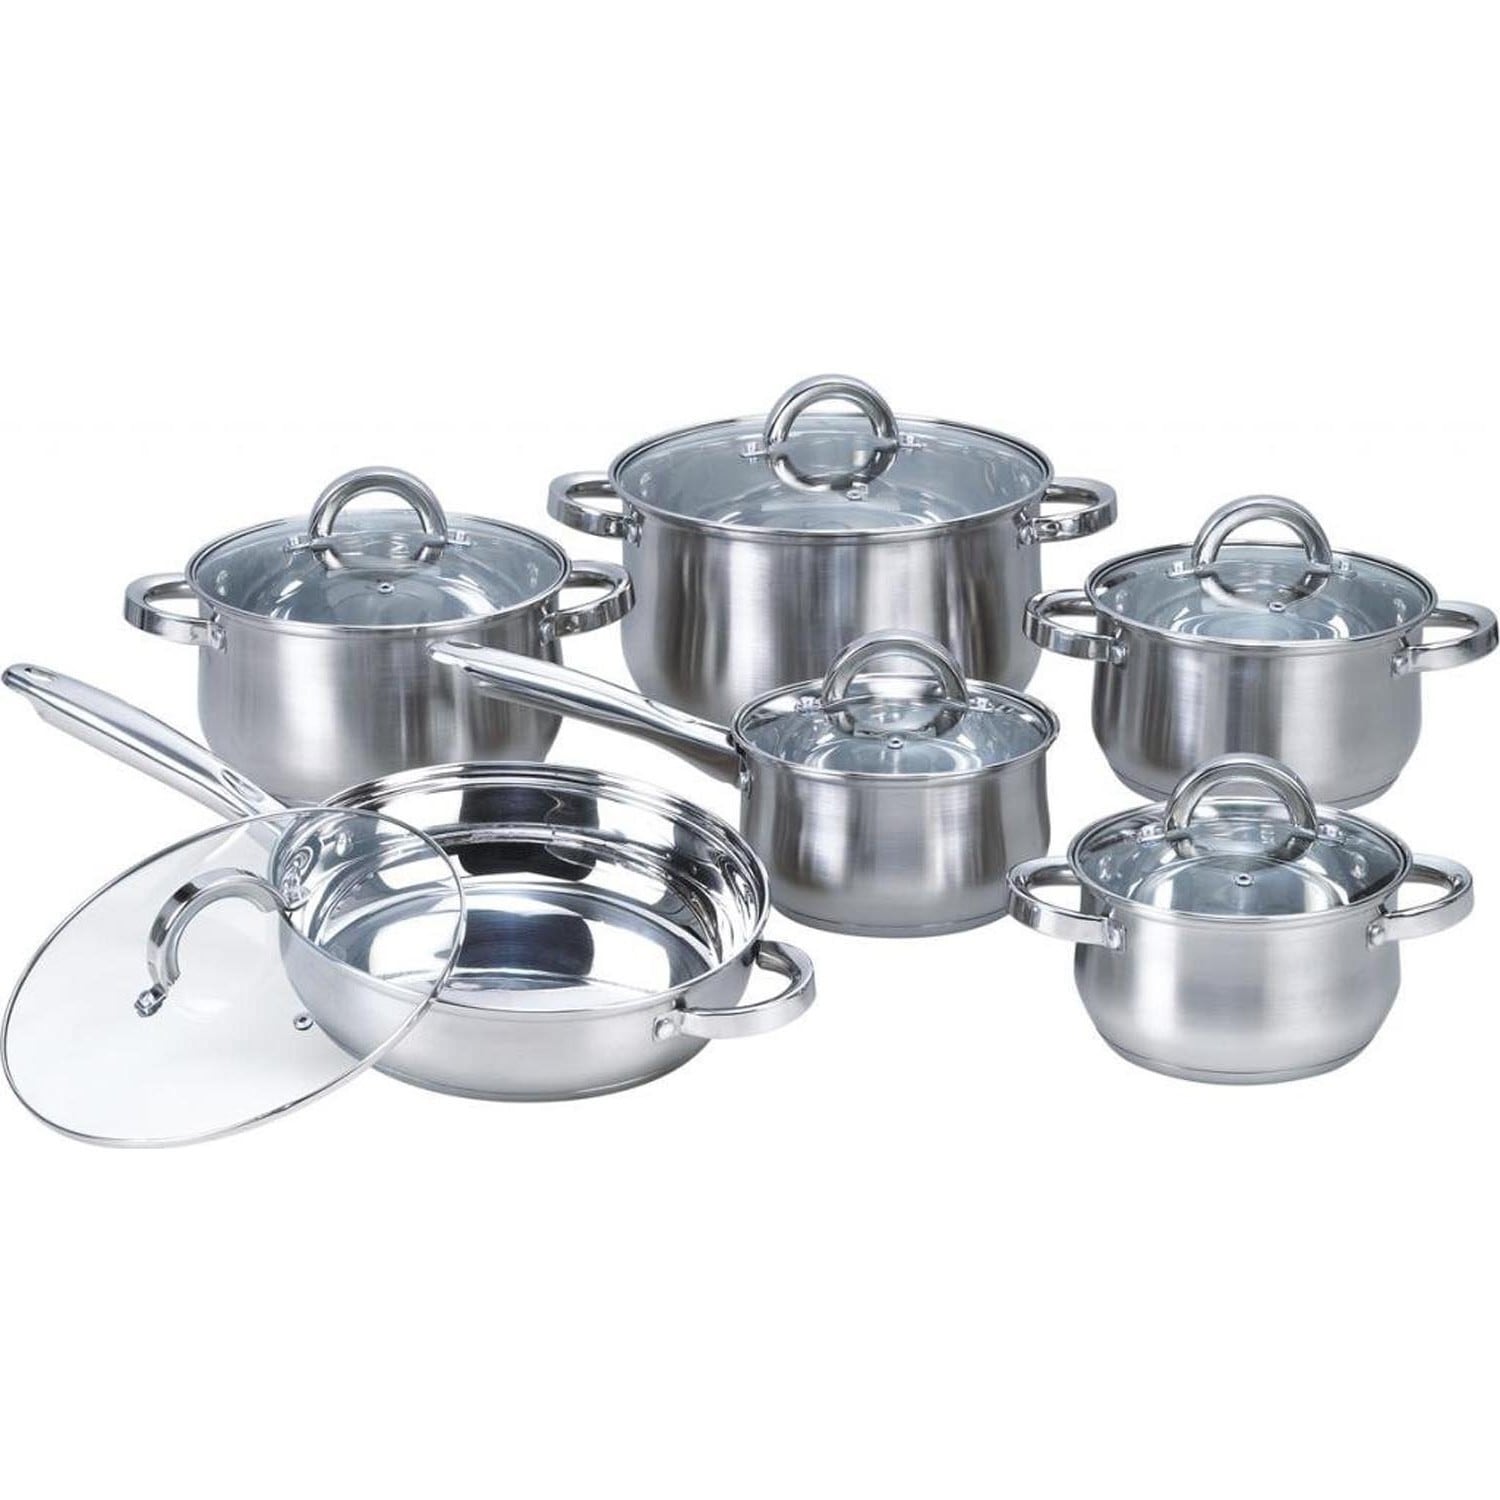 ZLINE 10-Pc Stainless Steel Cookware Set (CWSETL-ST-10)